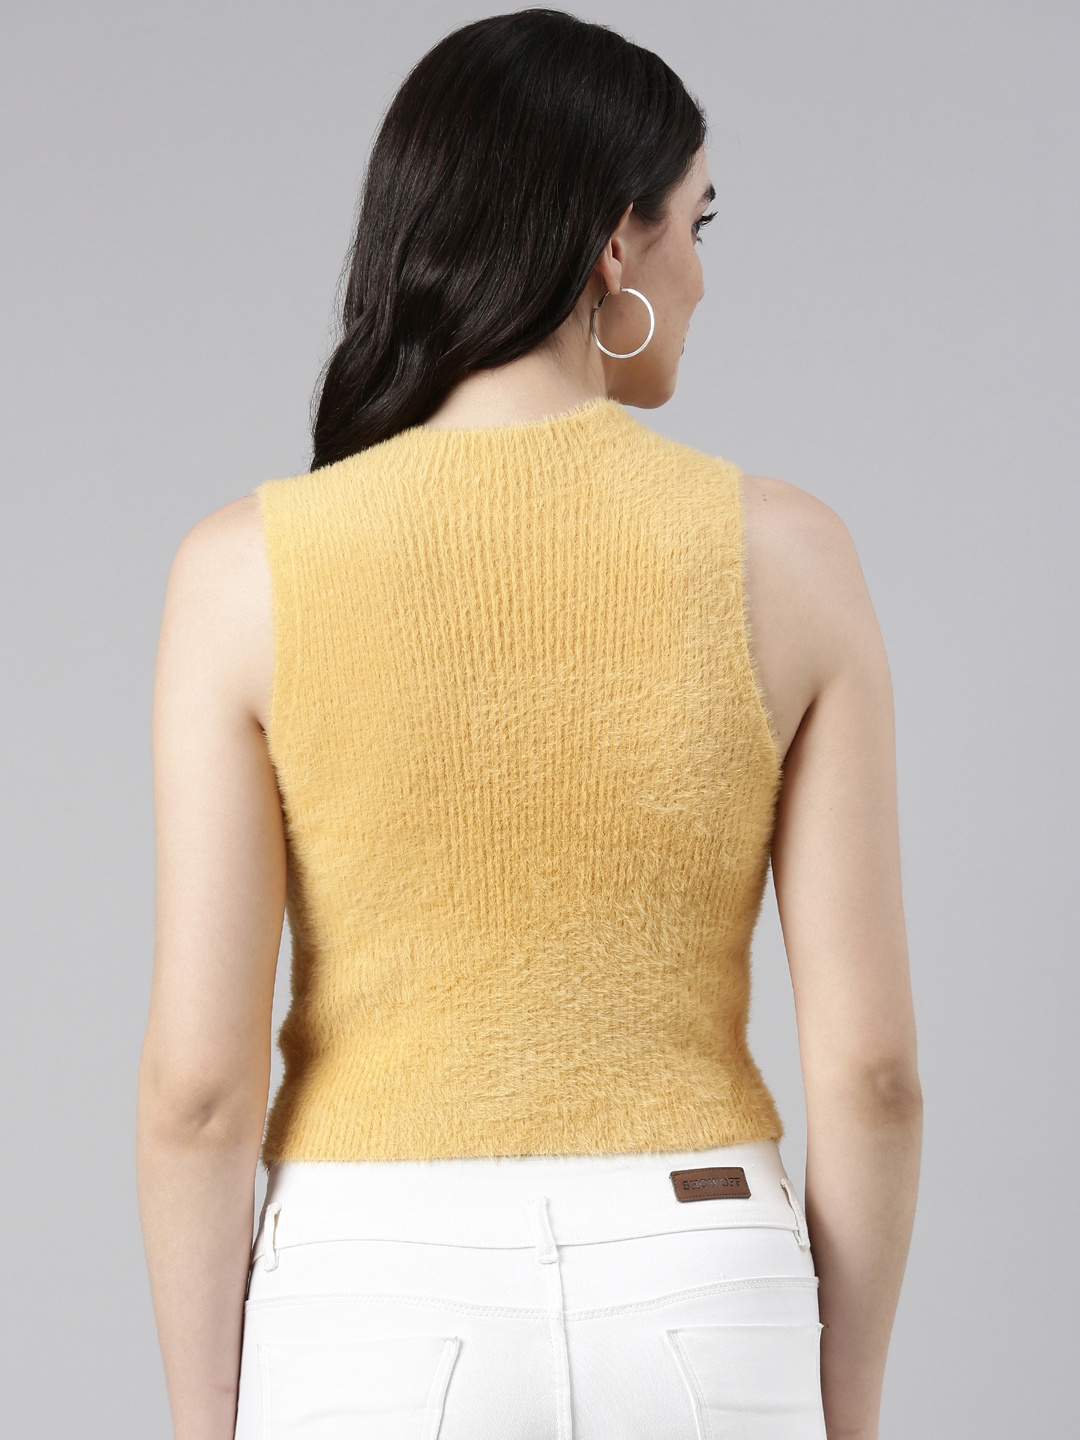 Showoff | SHOWOFF Women's High Neck Solid Sleeveless Mustard Tank Top 4